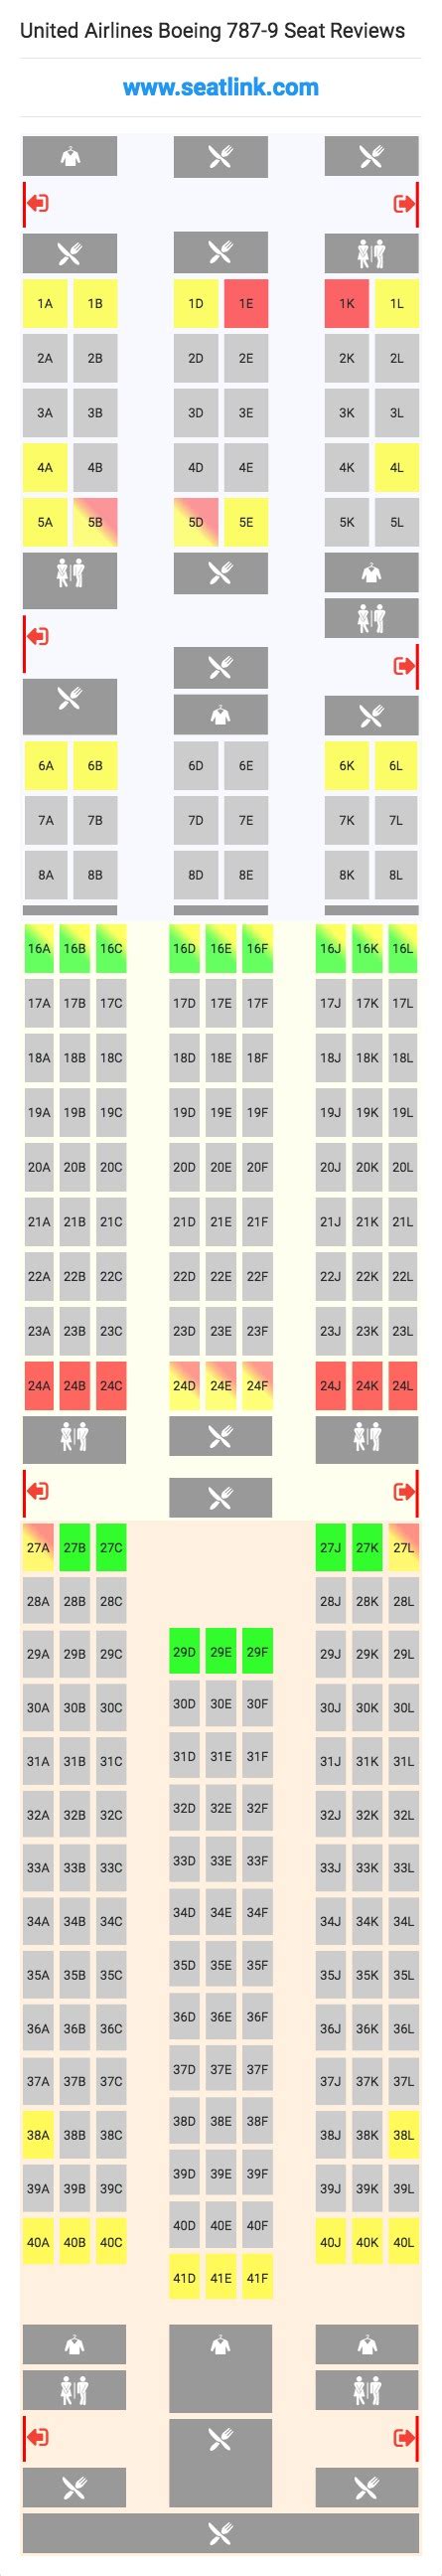 United Airlines Boeing 787 9 Seating Chart Updated January 2020